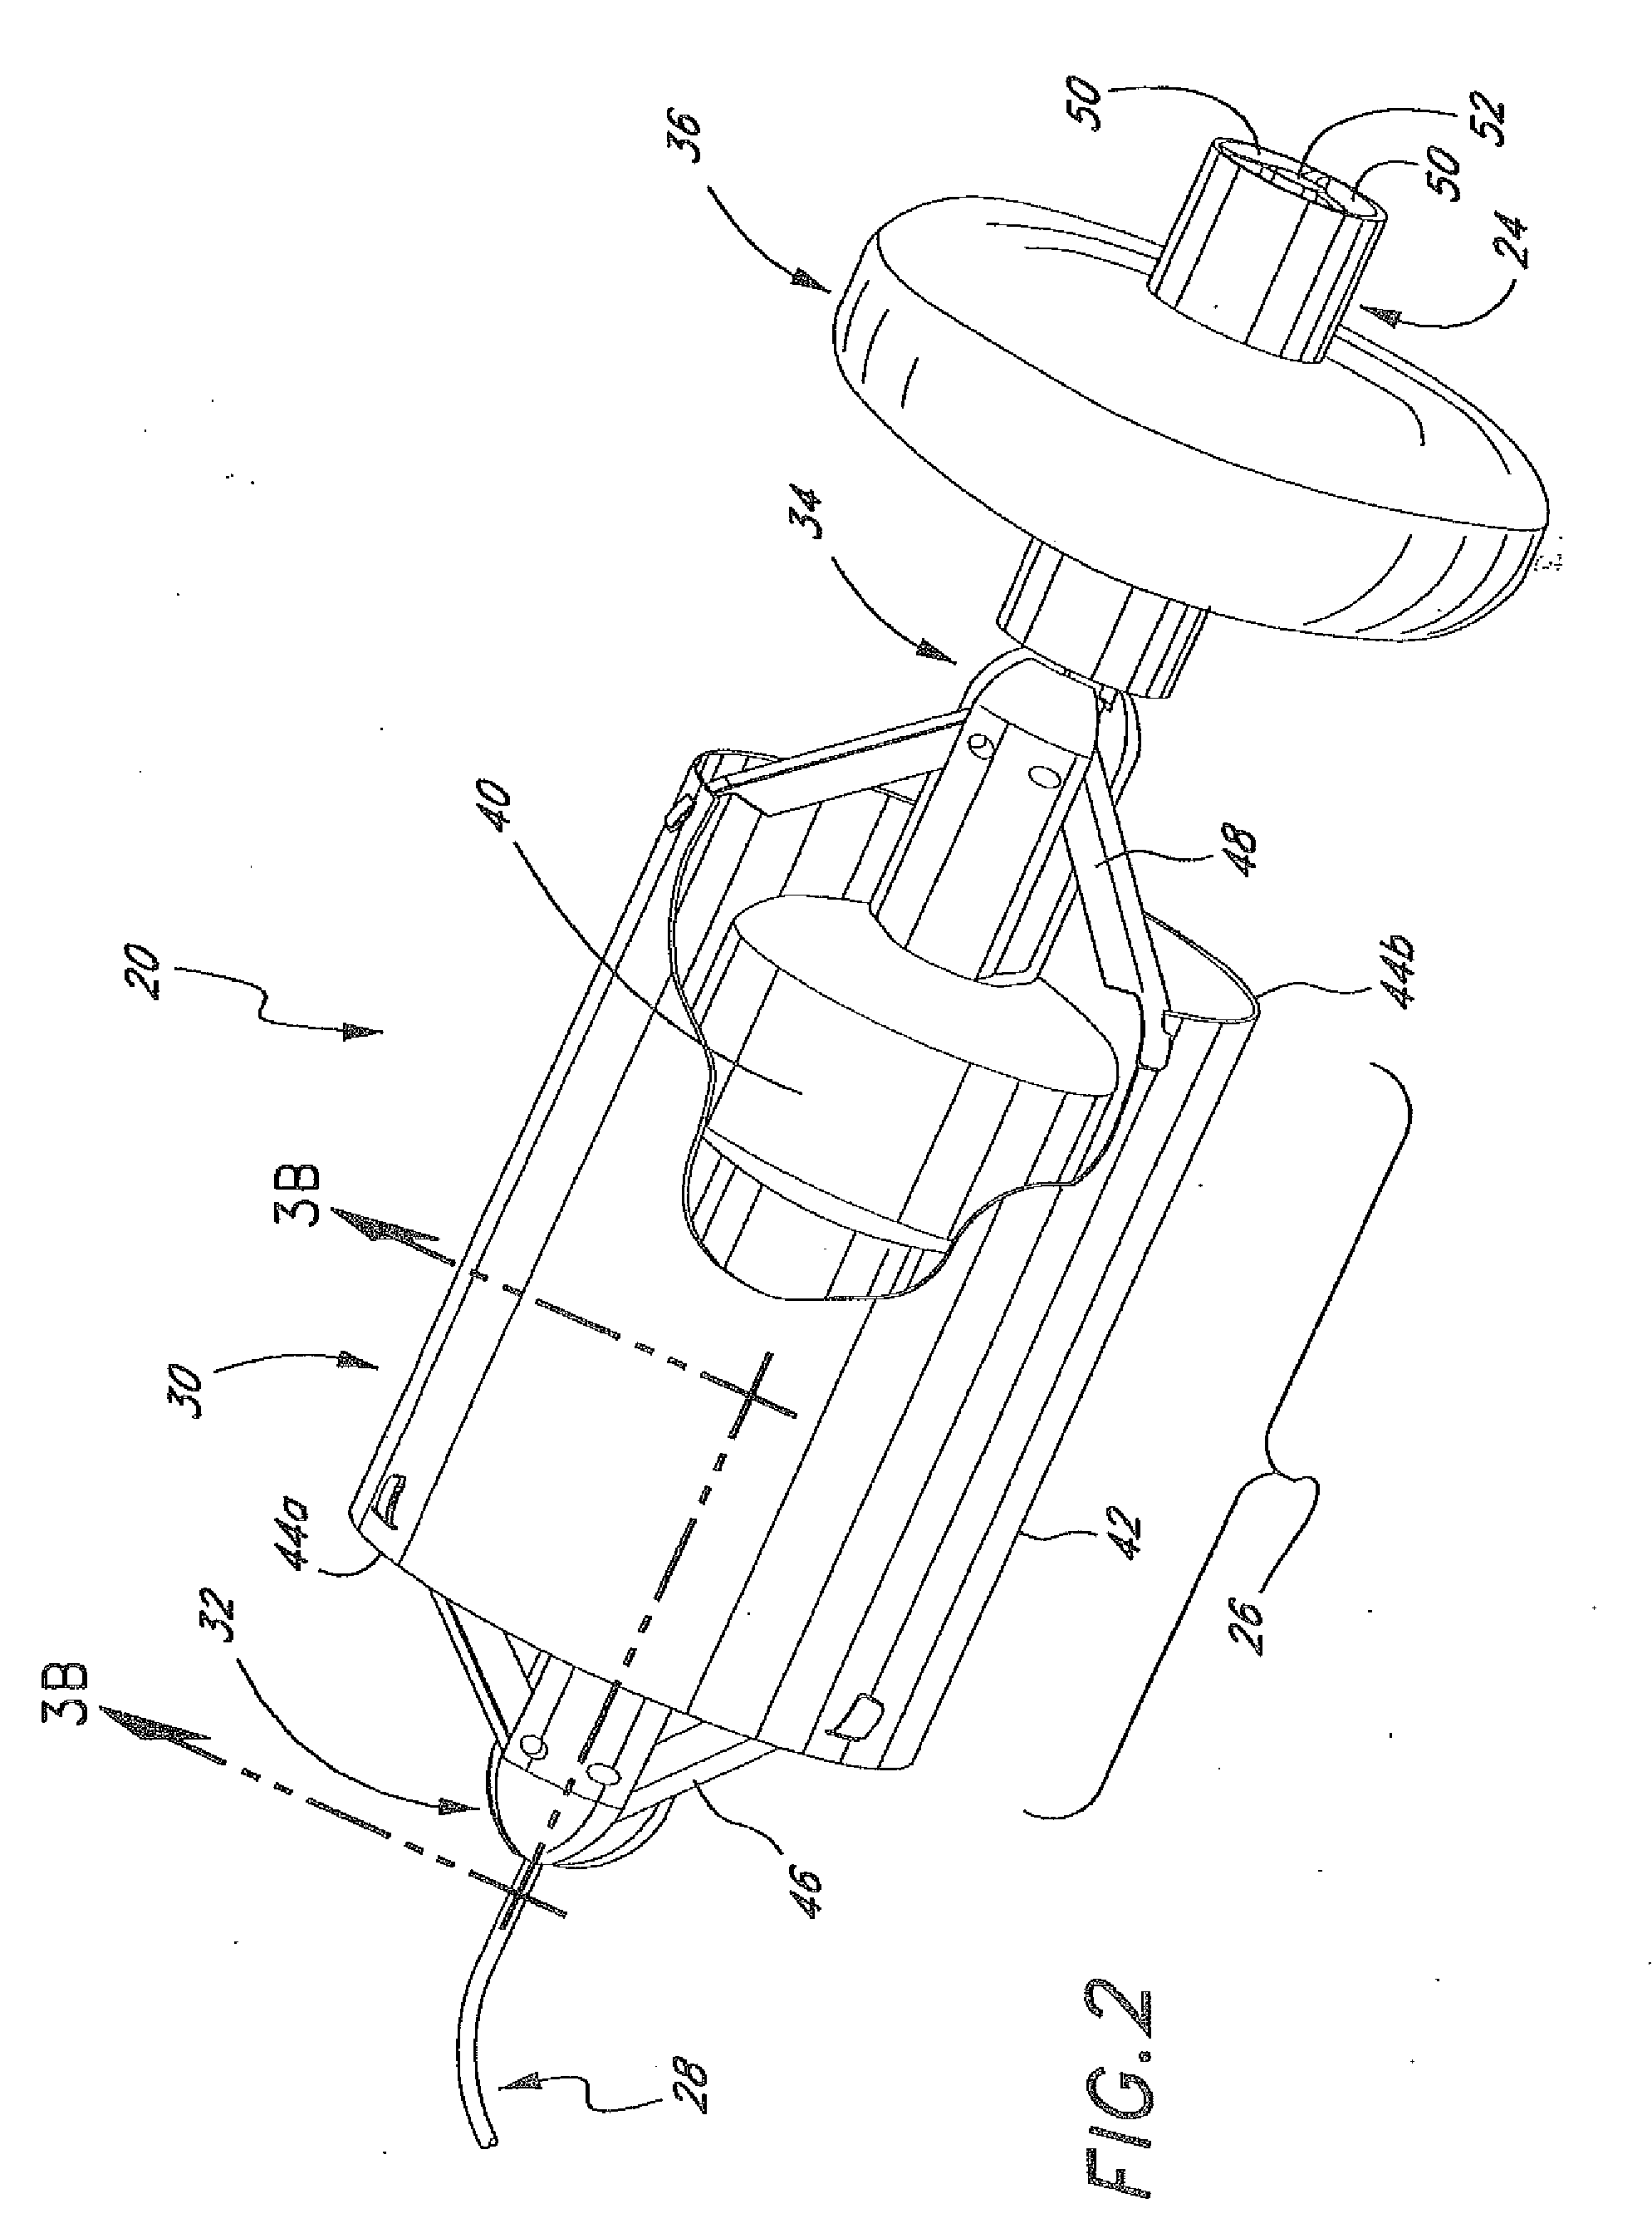 Method and Apparatuses for Deploying Minimally-Invasive Heart Valves